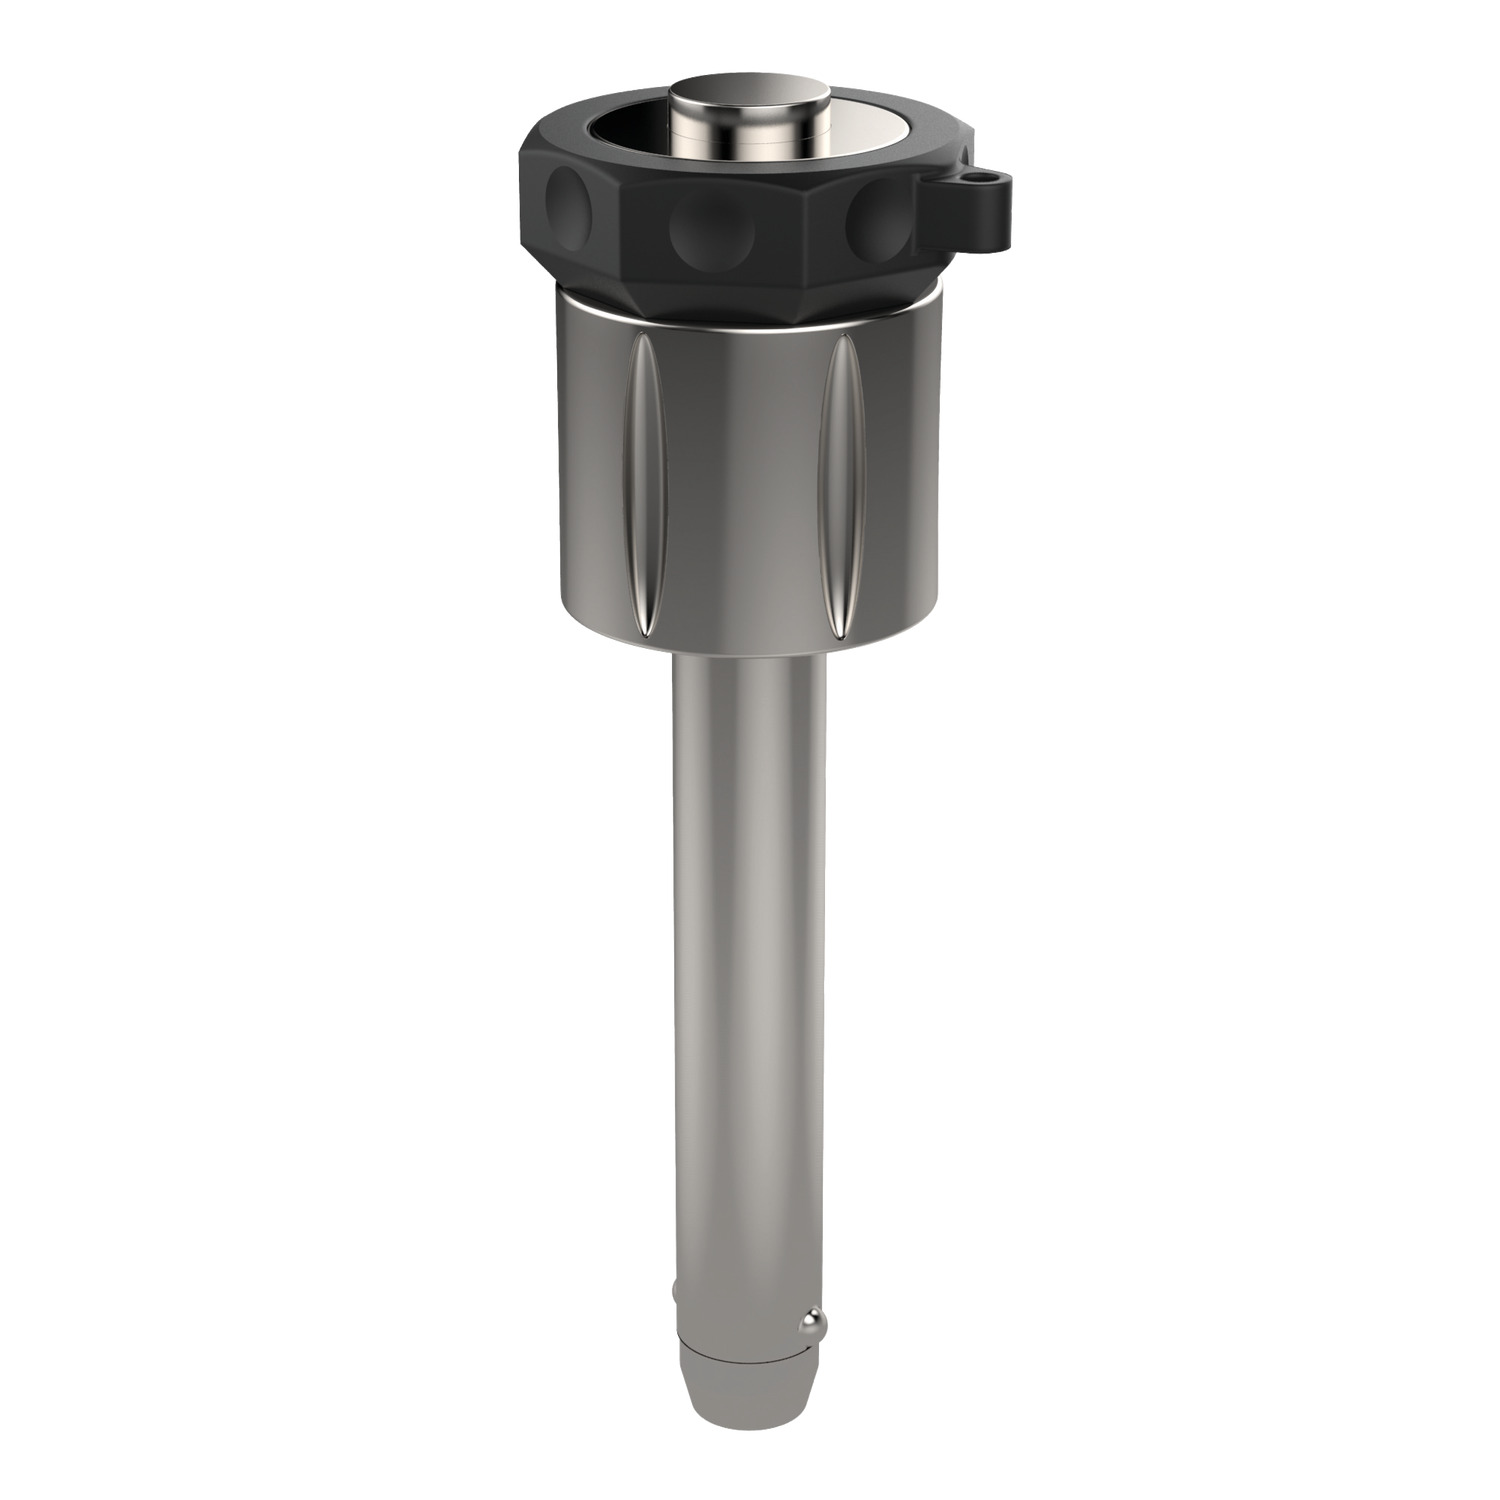 Ball Lock Pins - Single Acting Adjustable length stainless steel (AISI 303 or the high strength AISI 630) ball lock pin. For additional information on the adjustable length mechanism, see our ball locking pin video (if you'd like, skip to 5:58).